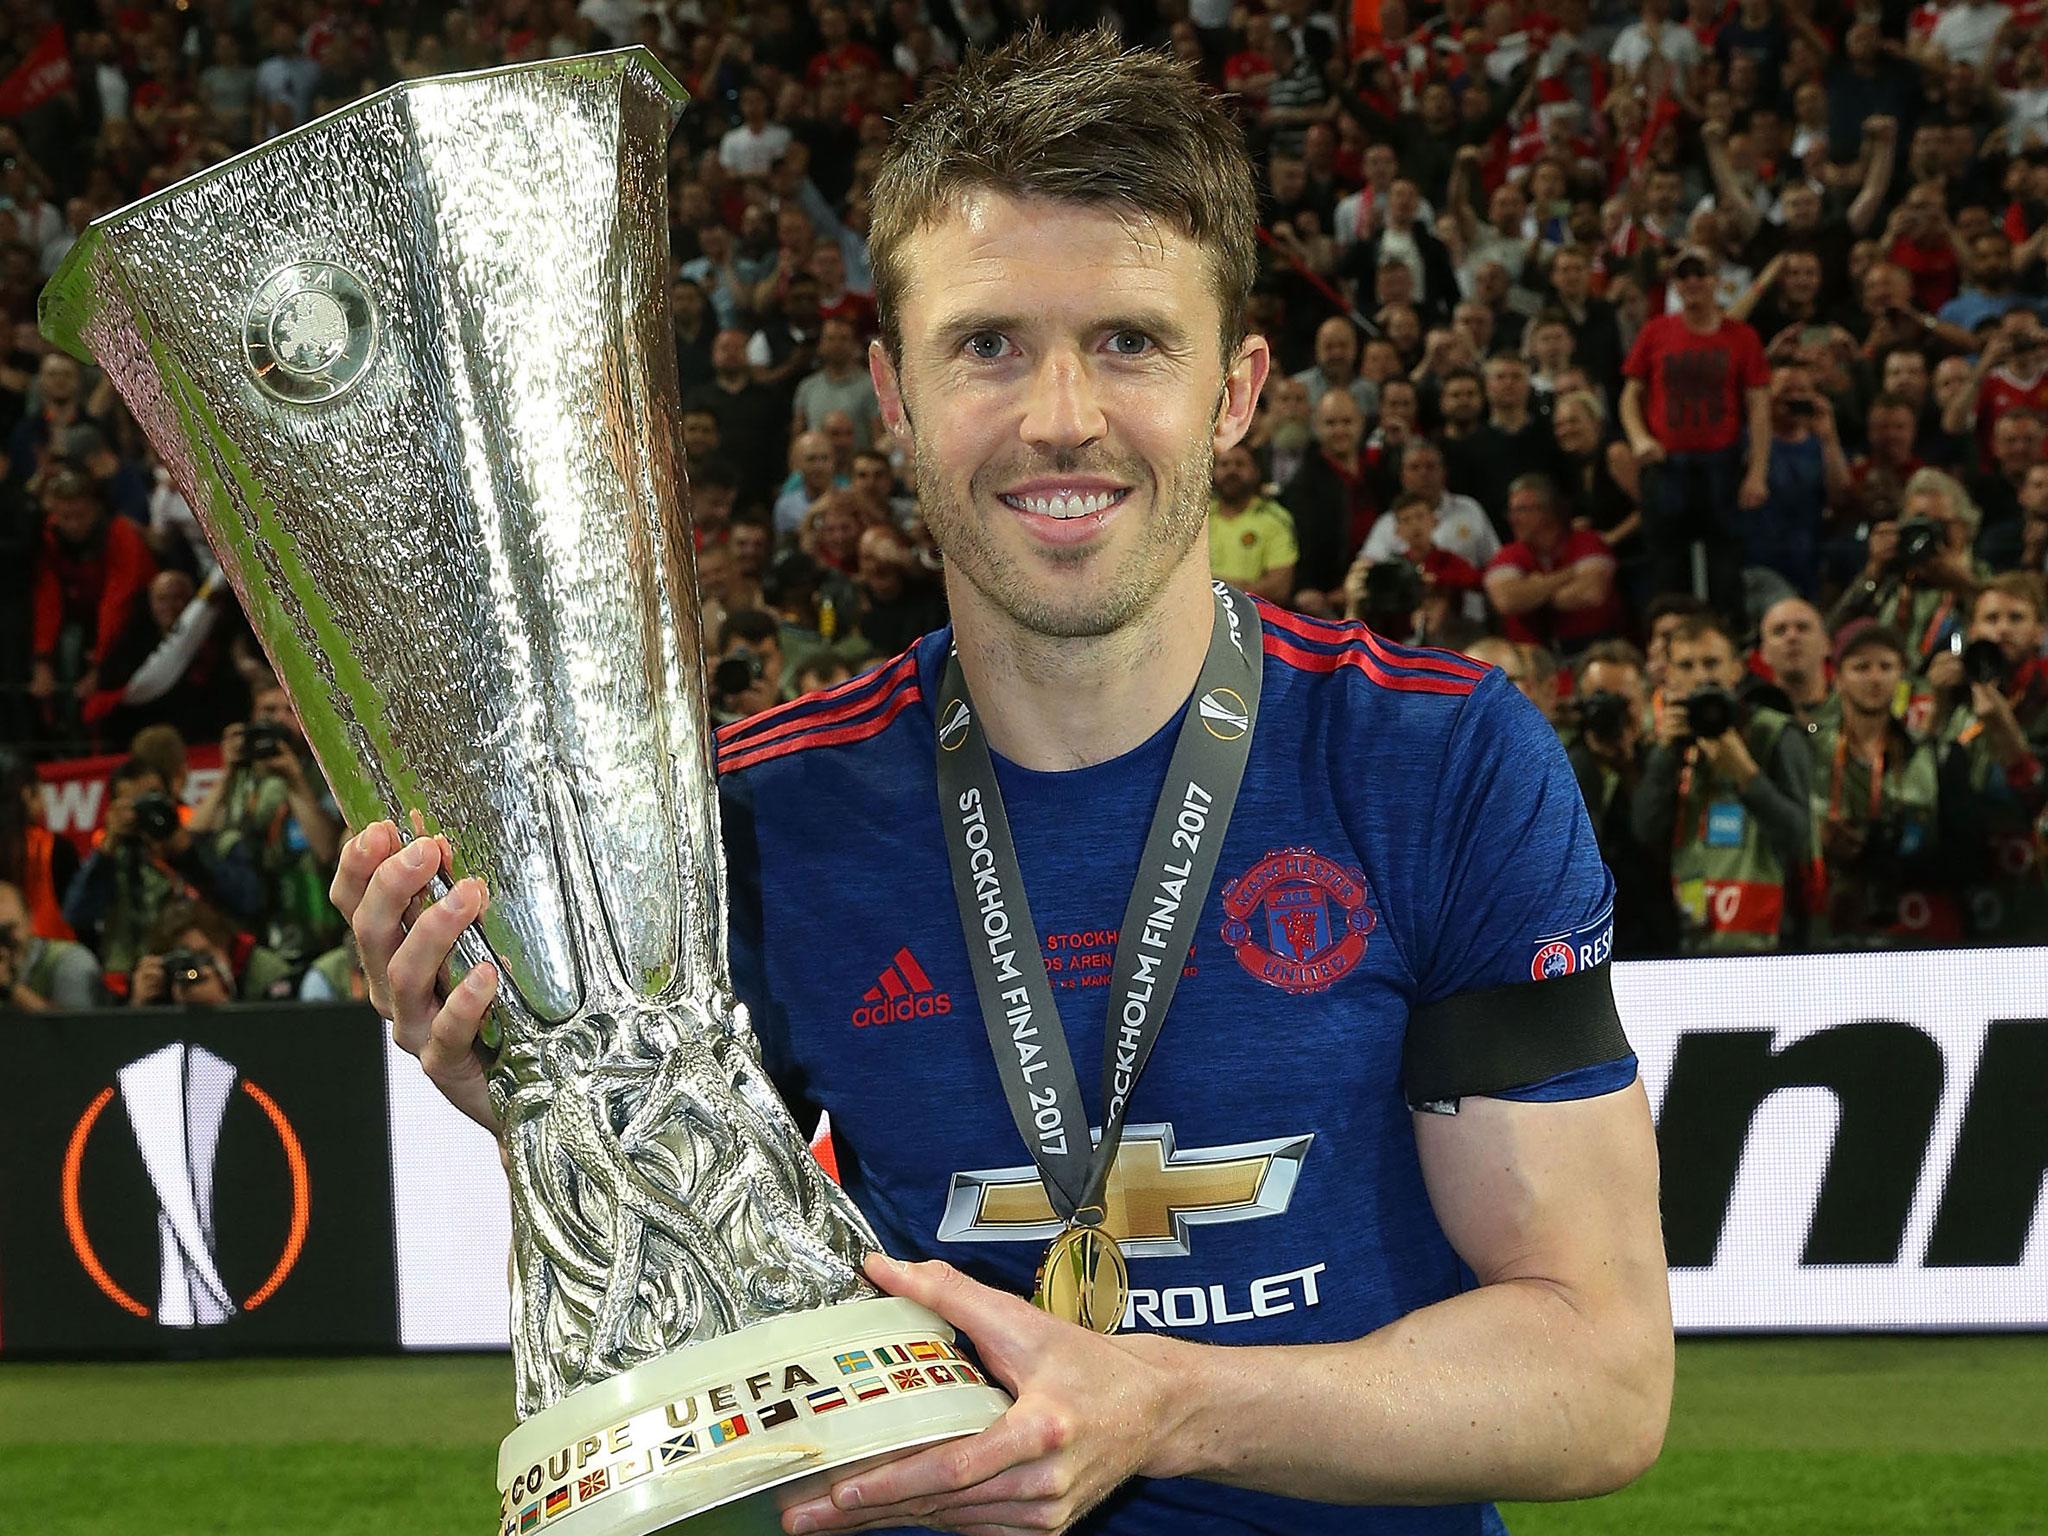 Michael Carrick has signed a one-year contract extension with Manchester United